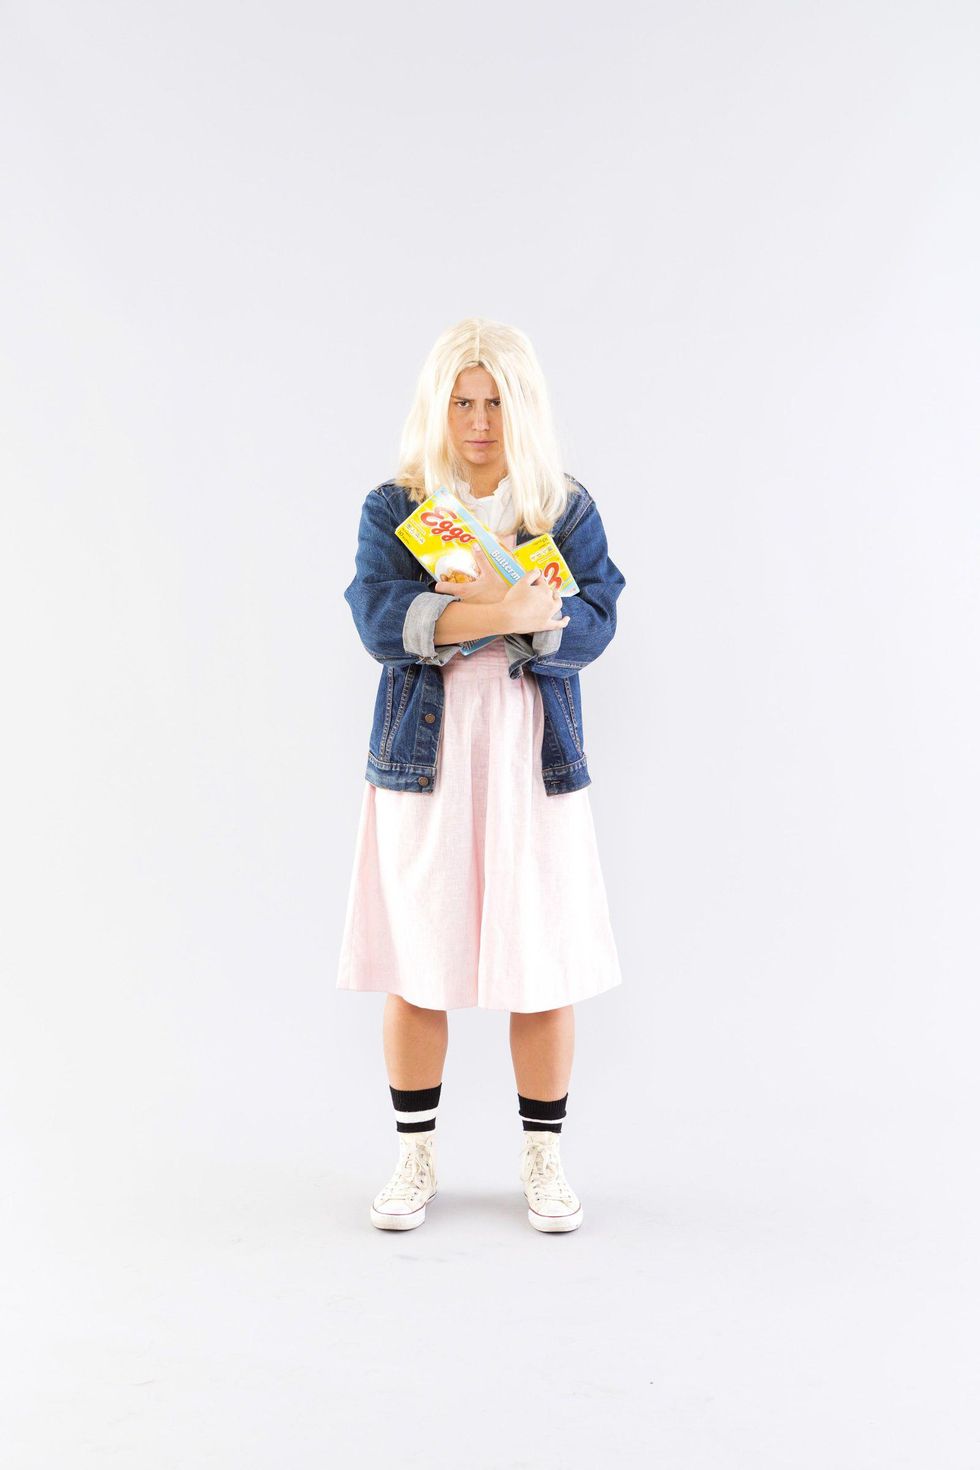 eleven from stranger things Easy Halloween Costumes